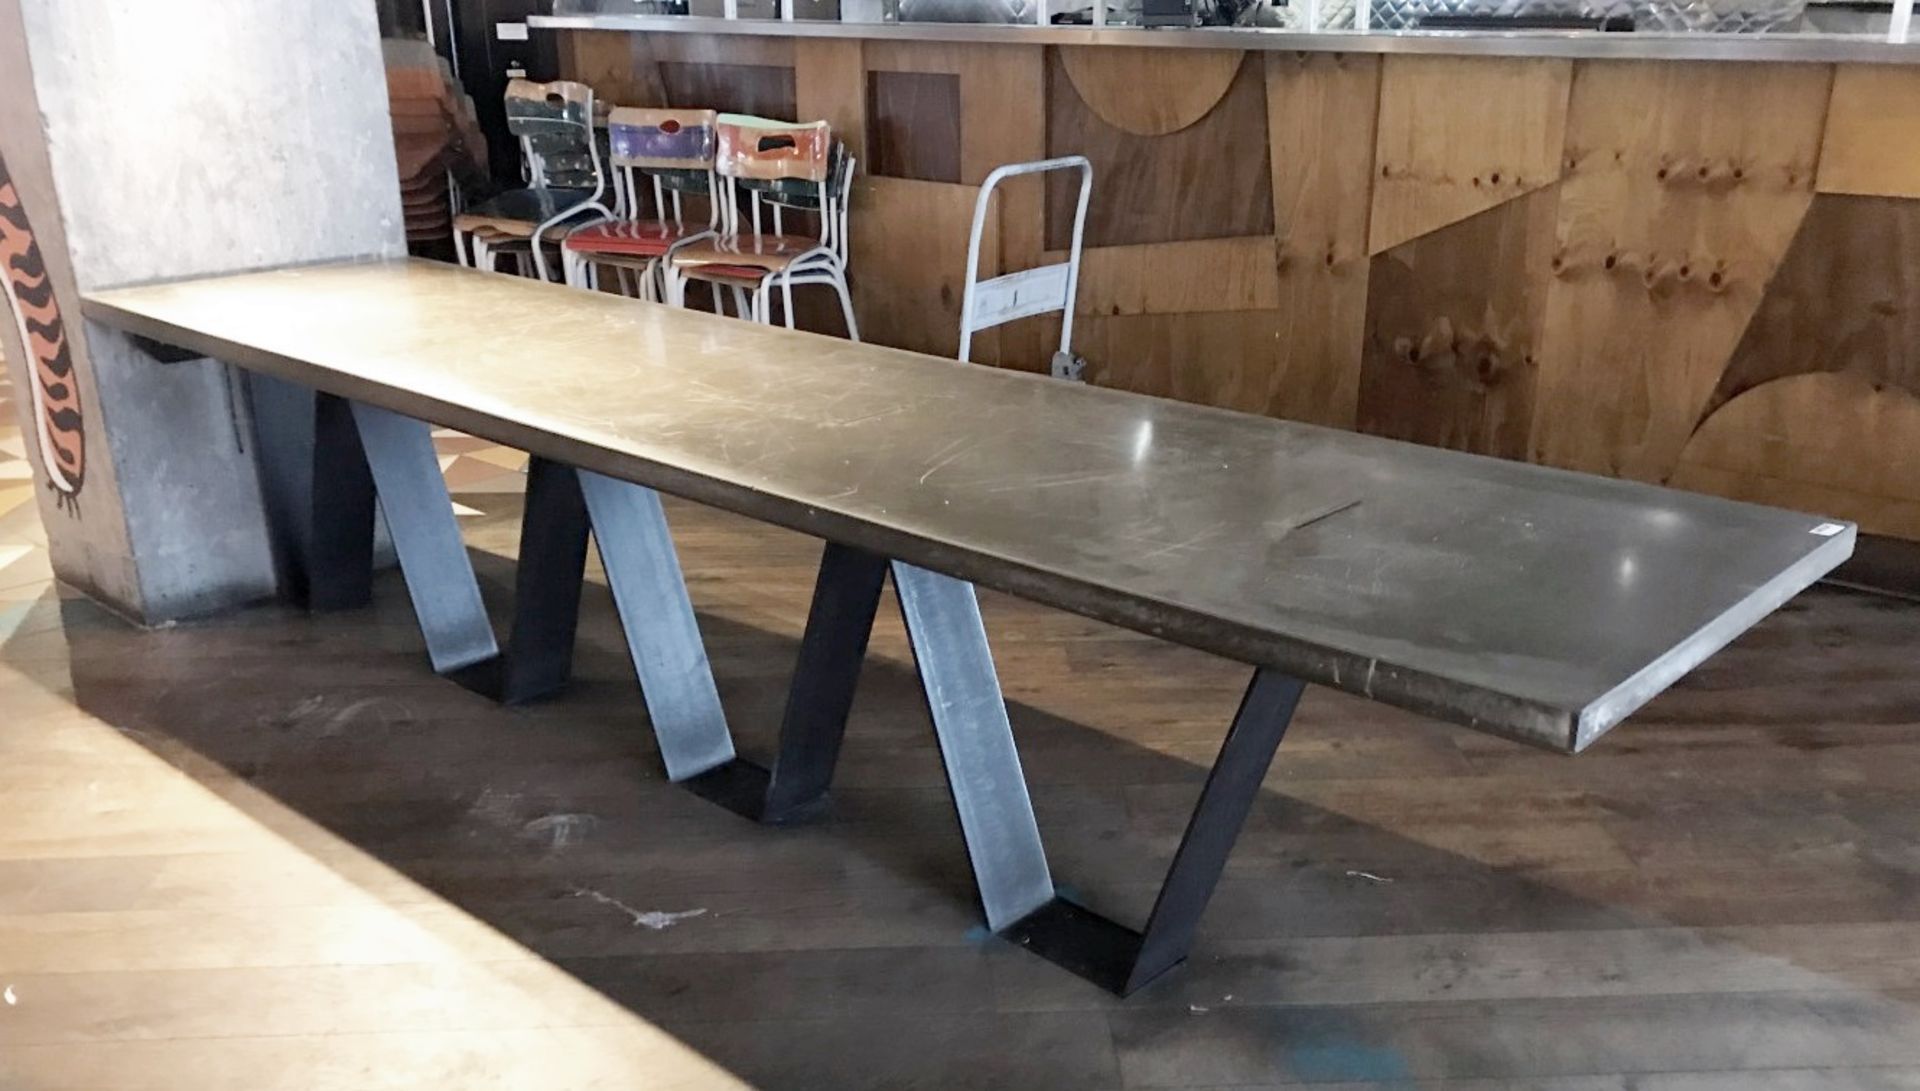 1 x Bespoke Industrial Style 10ft Long Concrete Topped Banquetting Restaurant Table - Image 6 of 9